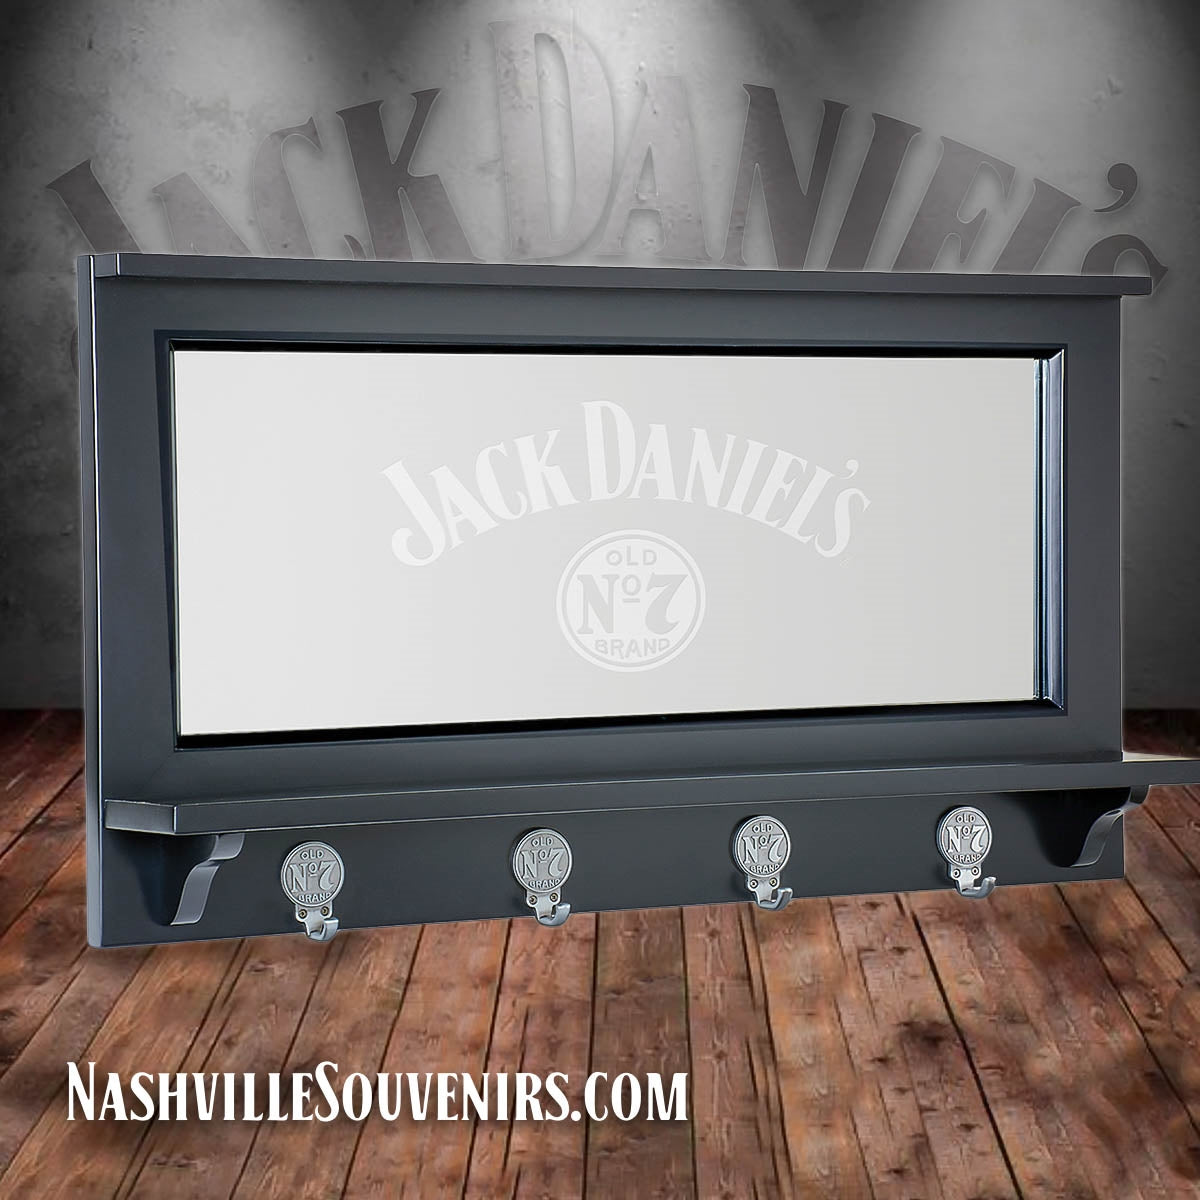 This Jack Daniel's Pub mirror not only looks good but is also very functional.  This is a great accessory for your home bar or rec room. The mirror has an etched Jack Daniel's Old No.7 Brand logo surrounded by decorative scrollwork design elements.